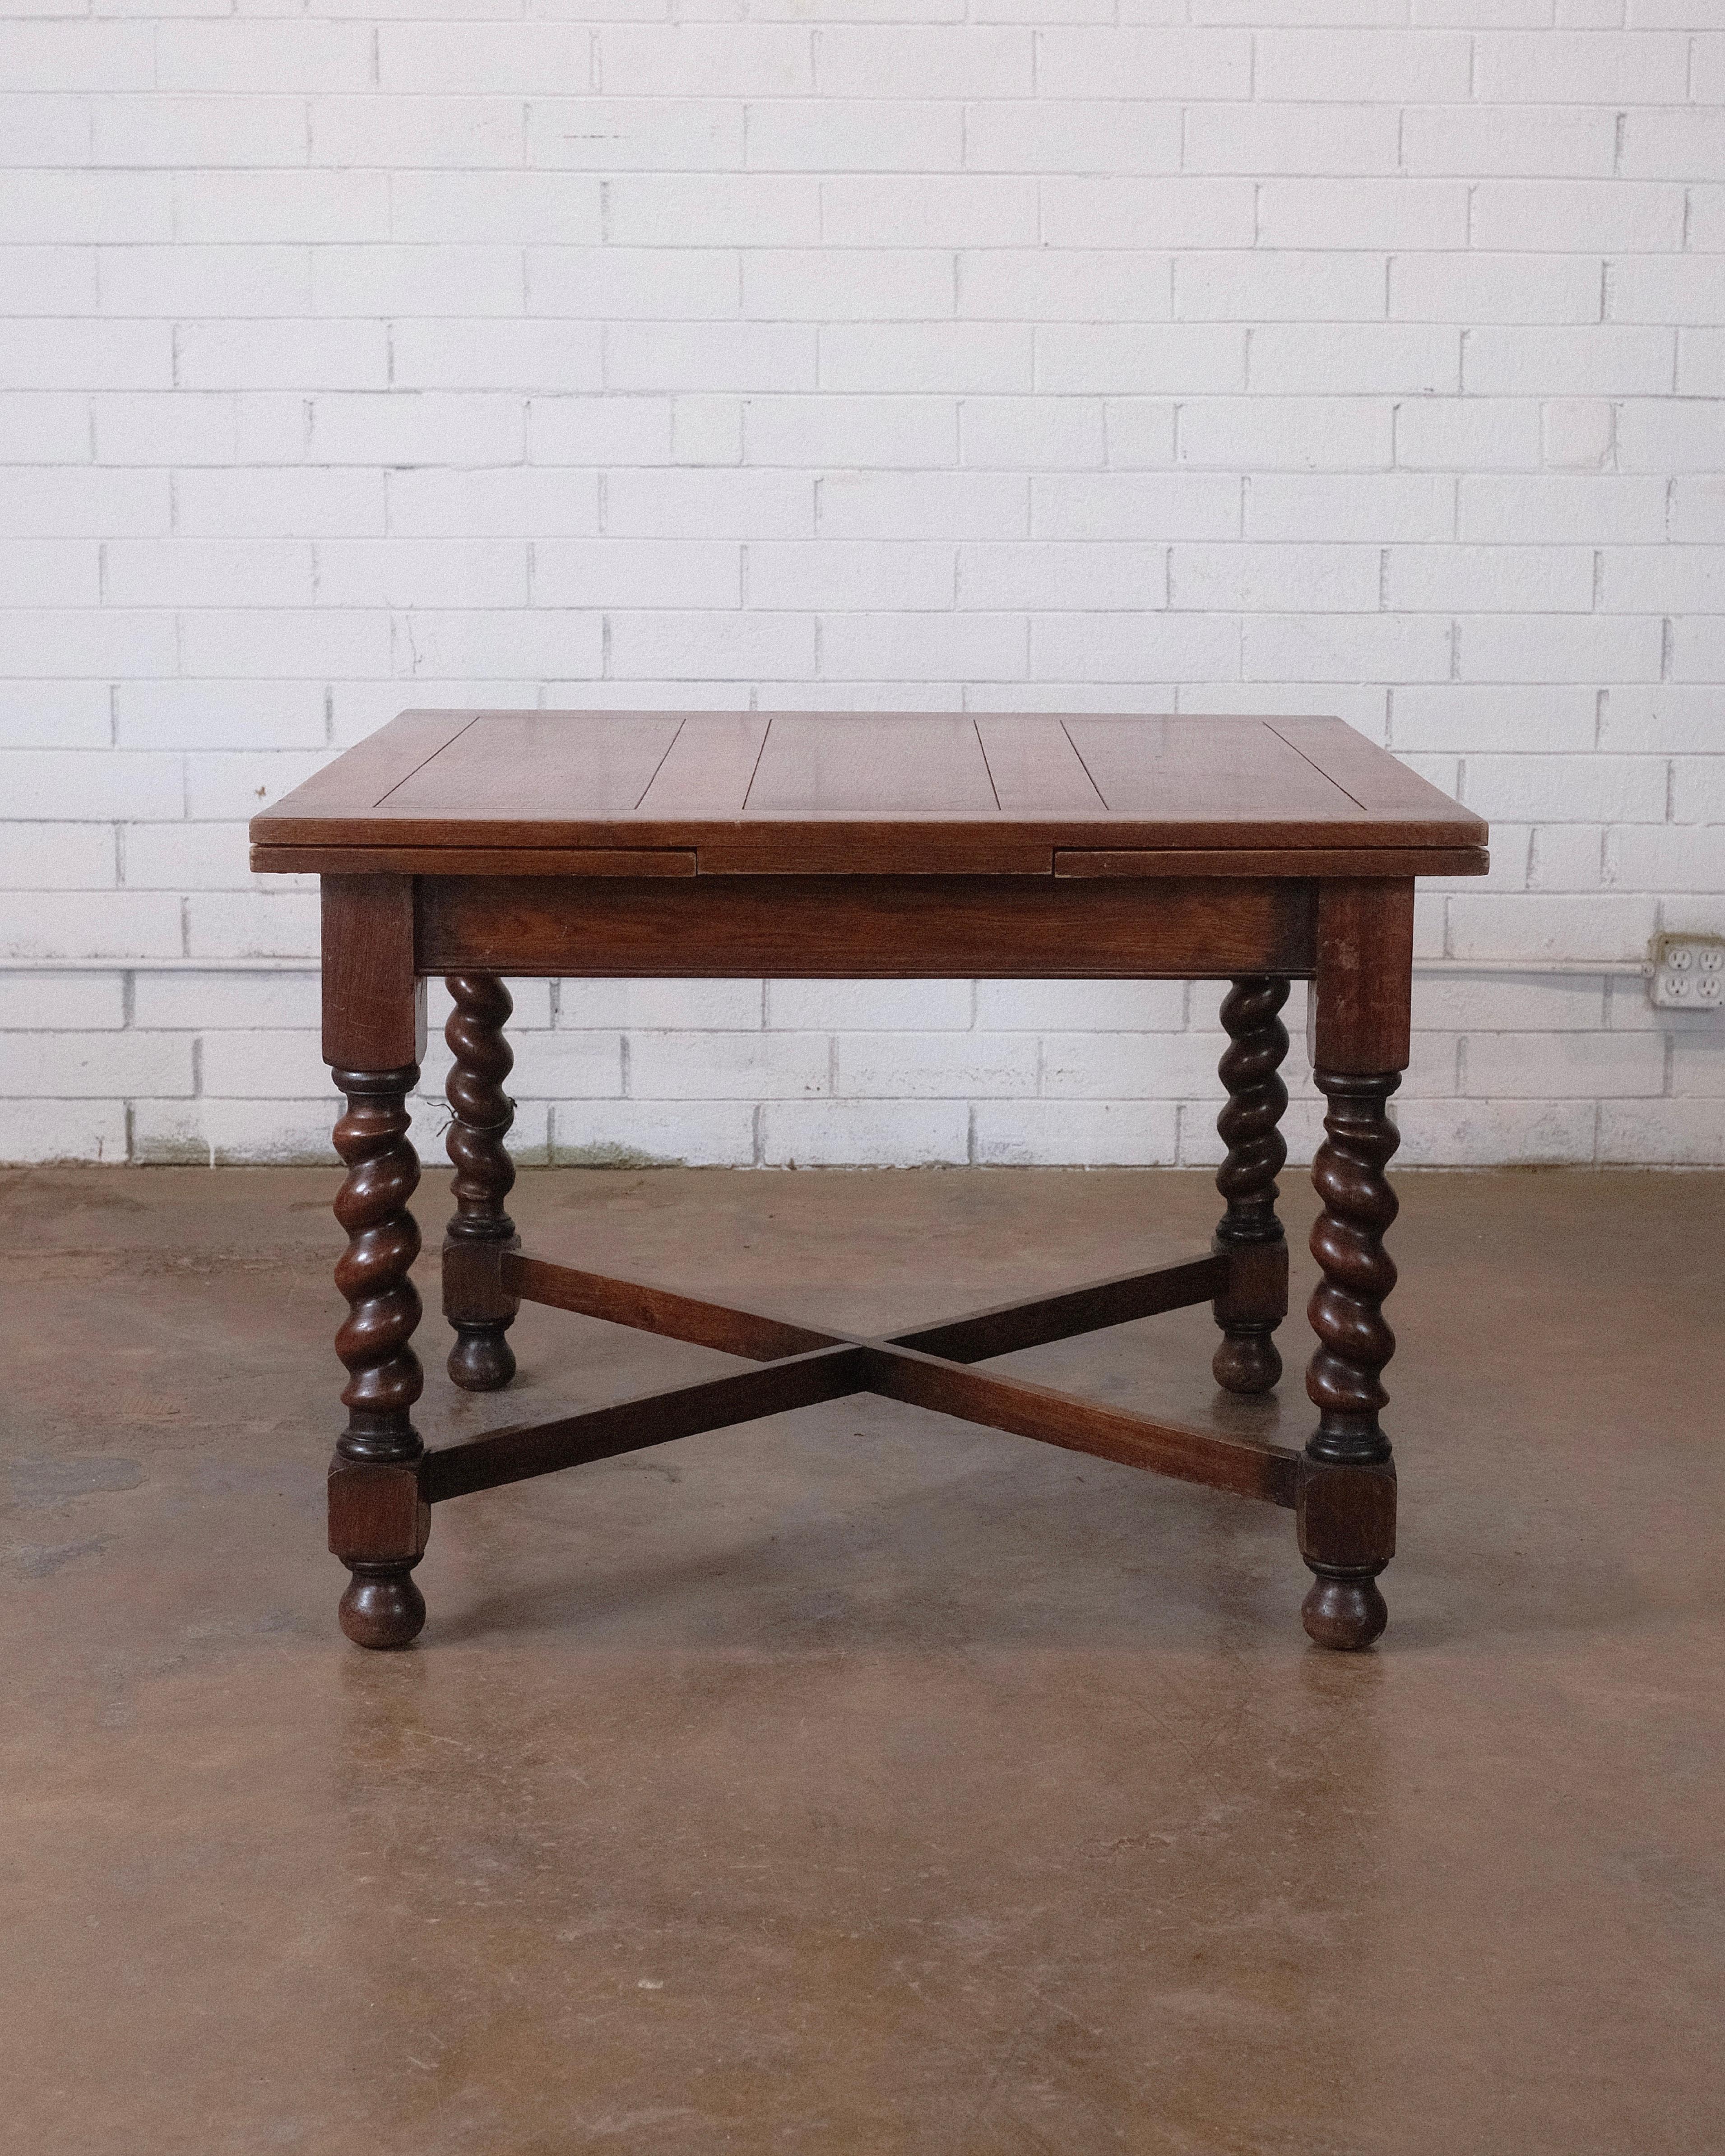 Presenting an Edwardian oak pub table from circa 1900, featuring convenient draw leaves for adaptable seating. The top and leaves boast paneled detailing, supported by a straightforward apron that gracefully descends to hand-turned barley twist